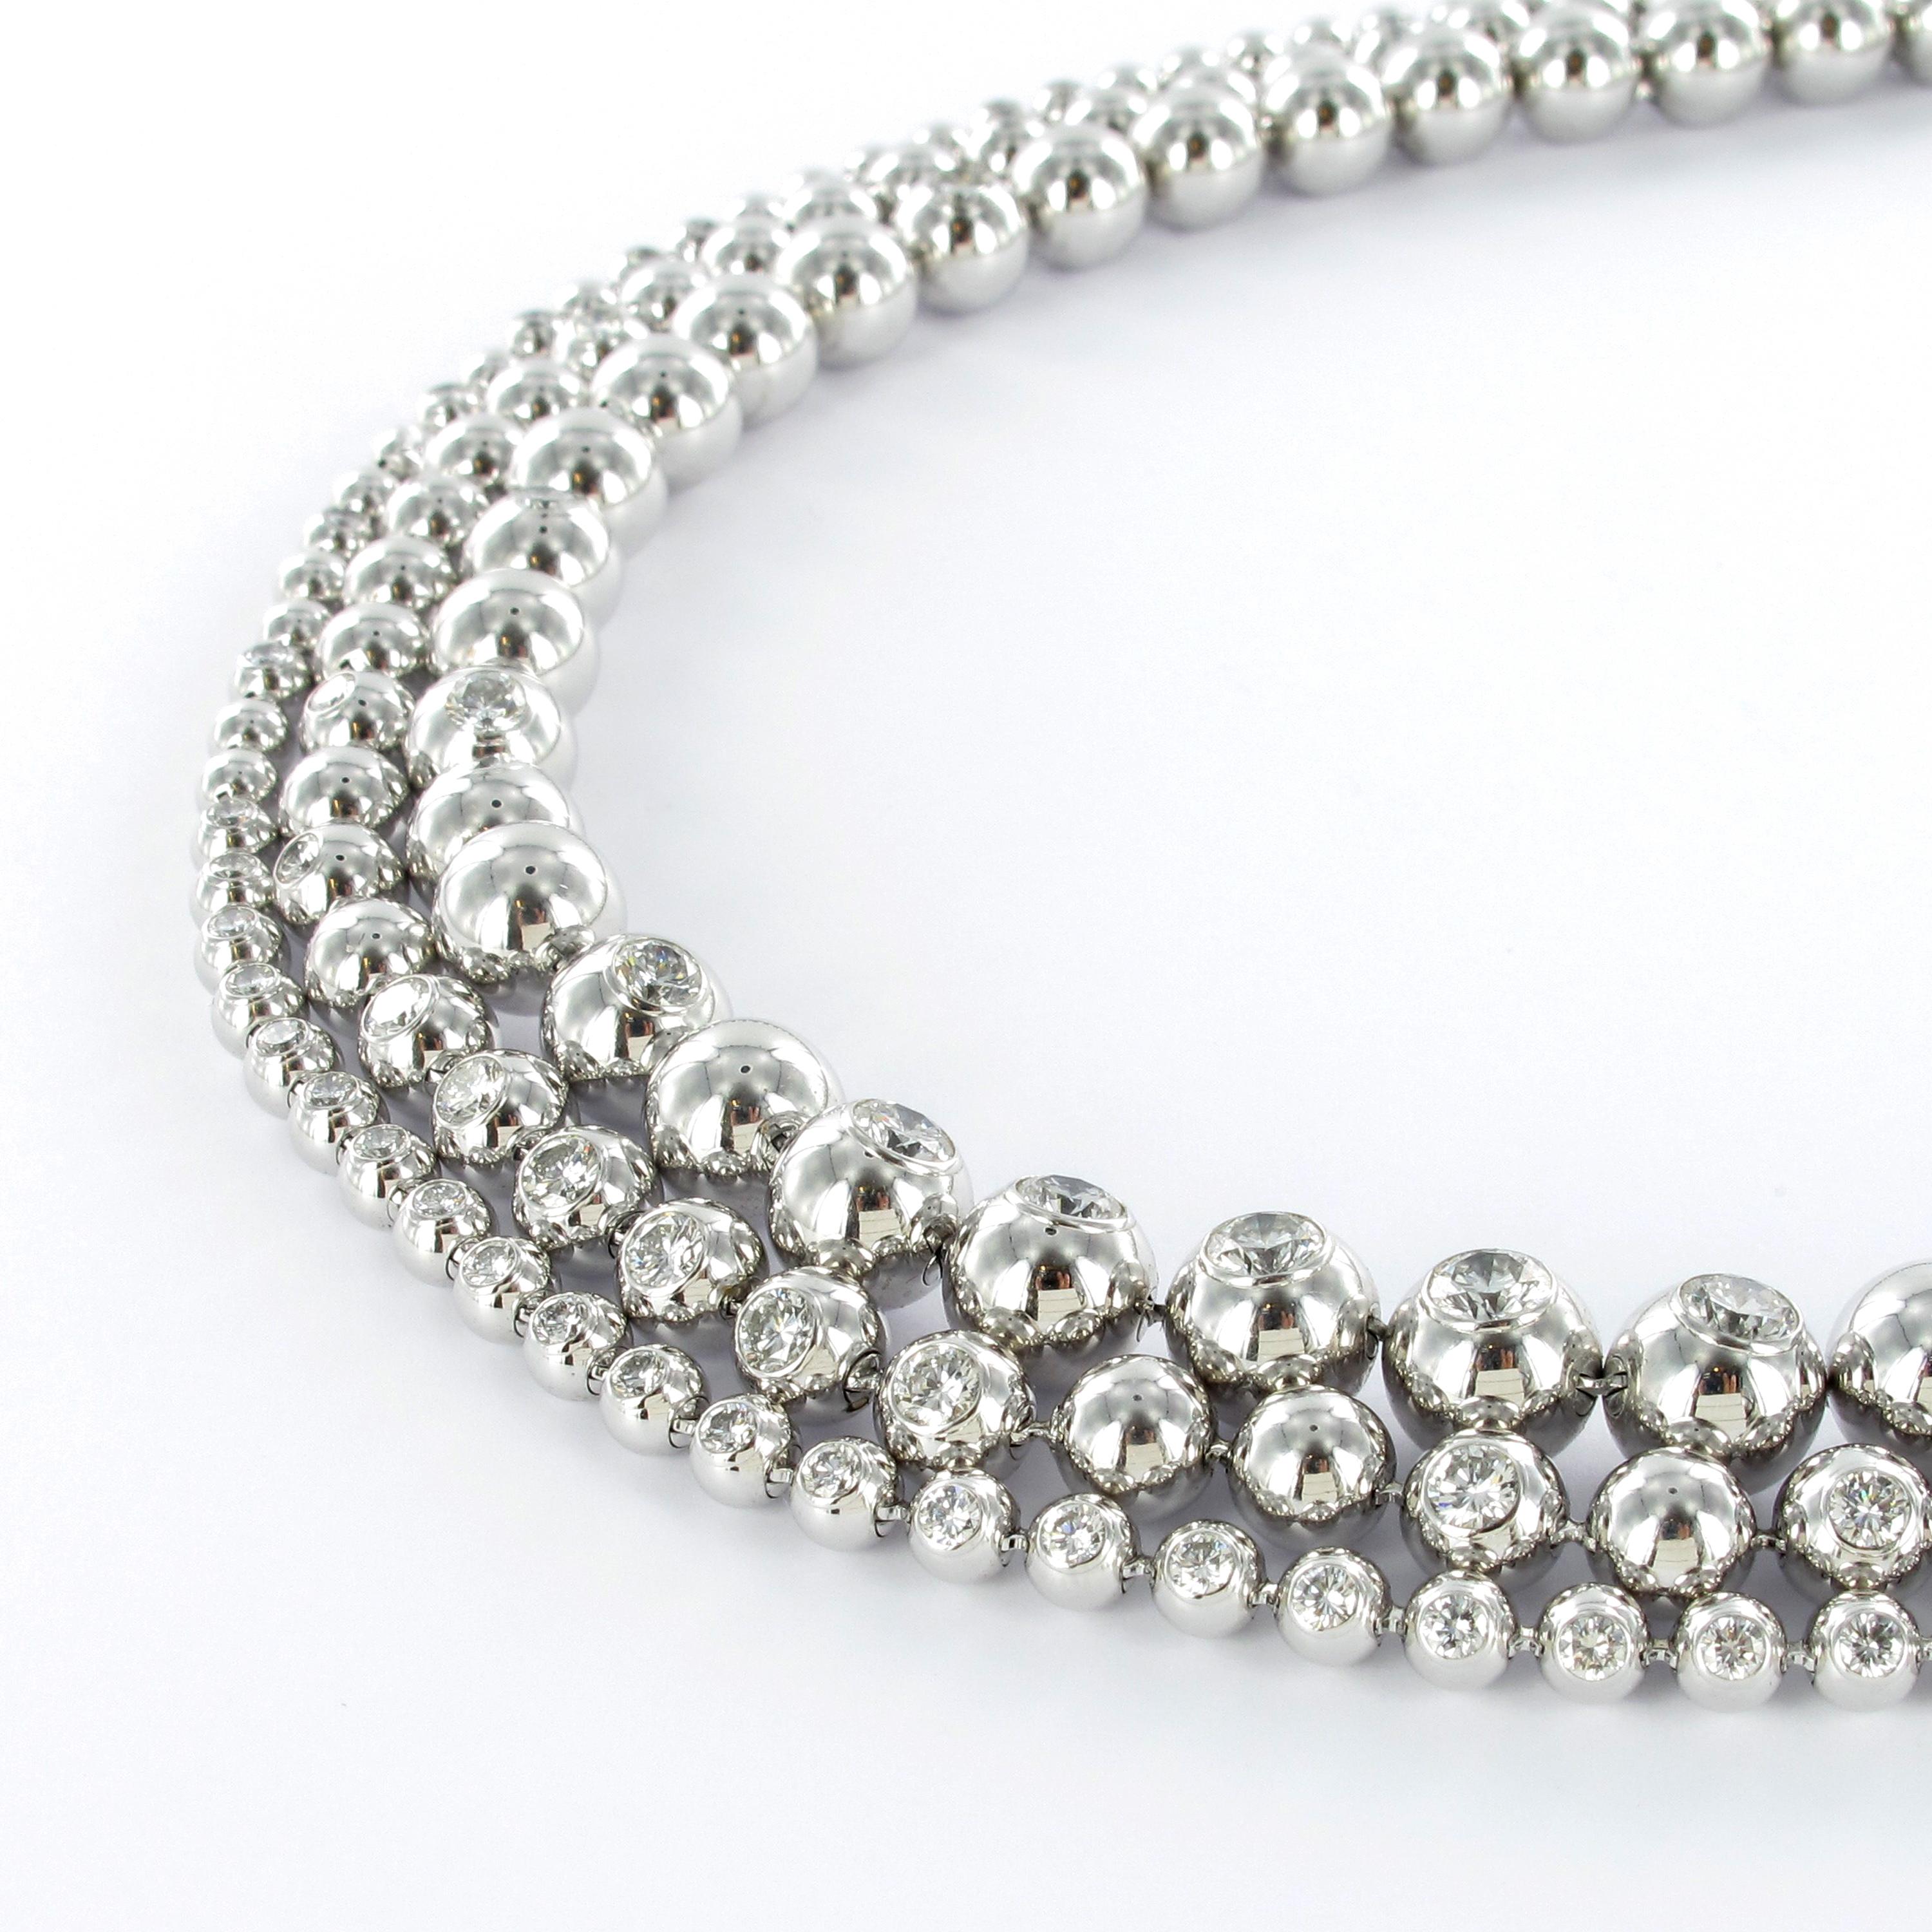 Impressive Cartier three-row diamond bracelet of the 'Perles de Diamants' collection. Polished beads are flush-set with 79 round brilliant-cut diamonds of 8.08 carats, F color and vs clarity.
Signed and numbered CRN7020801.

Maker's mark: